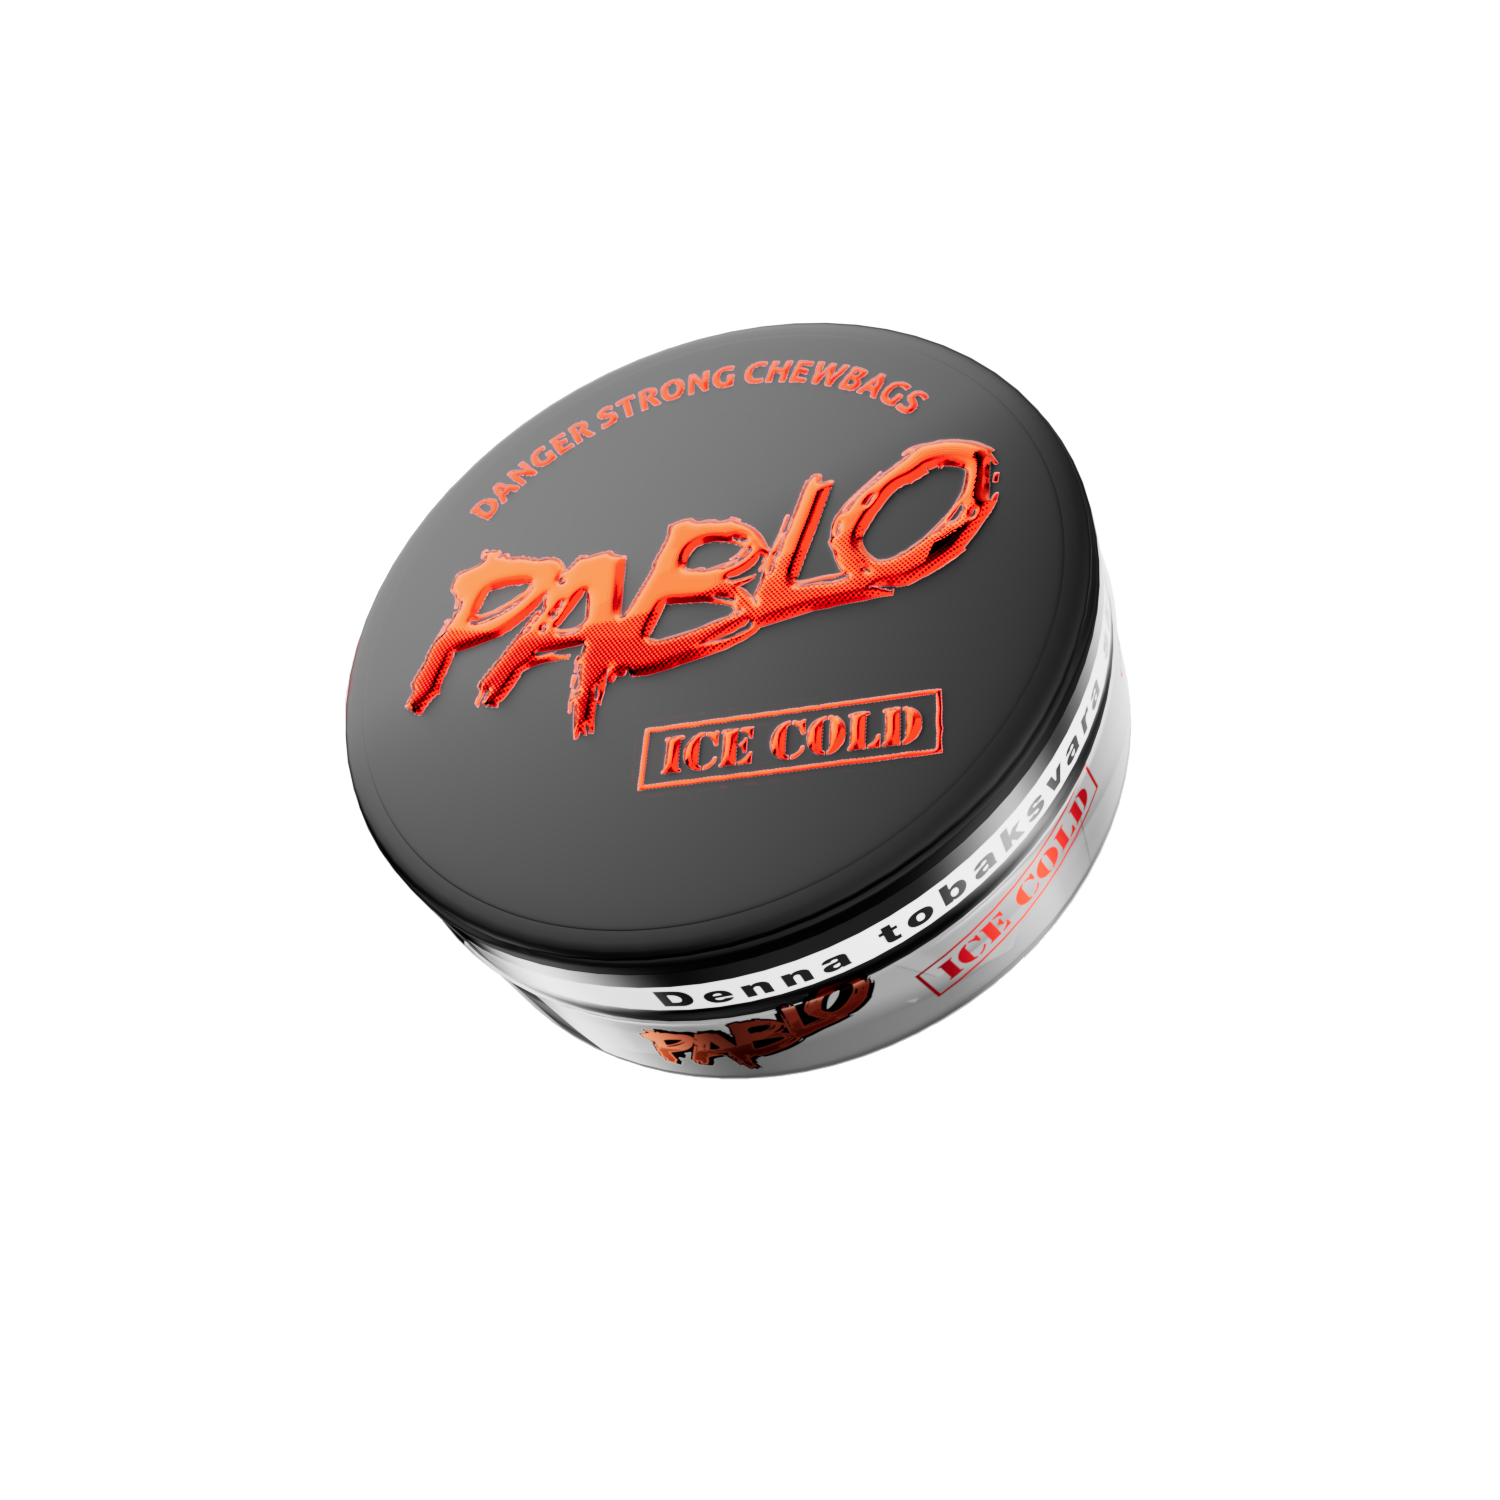 Pablo_Chewbags_IceCold_1